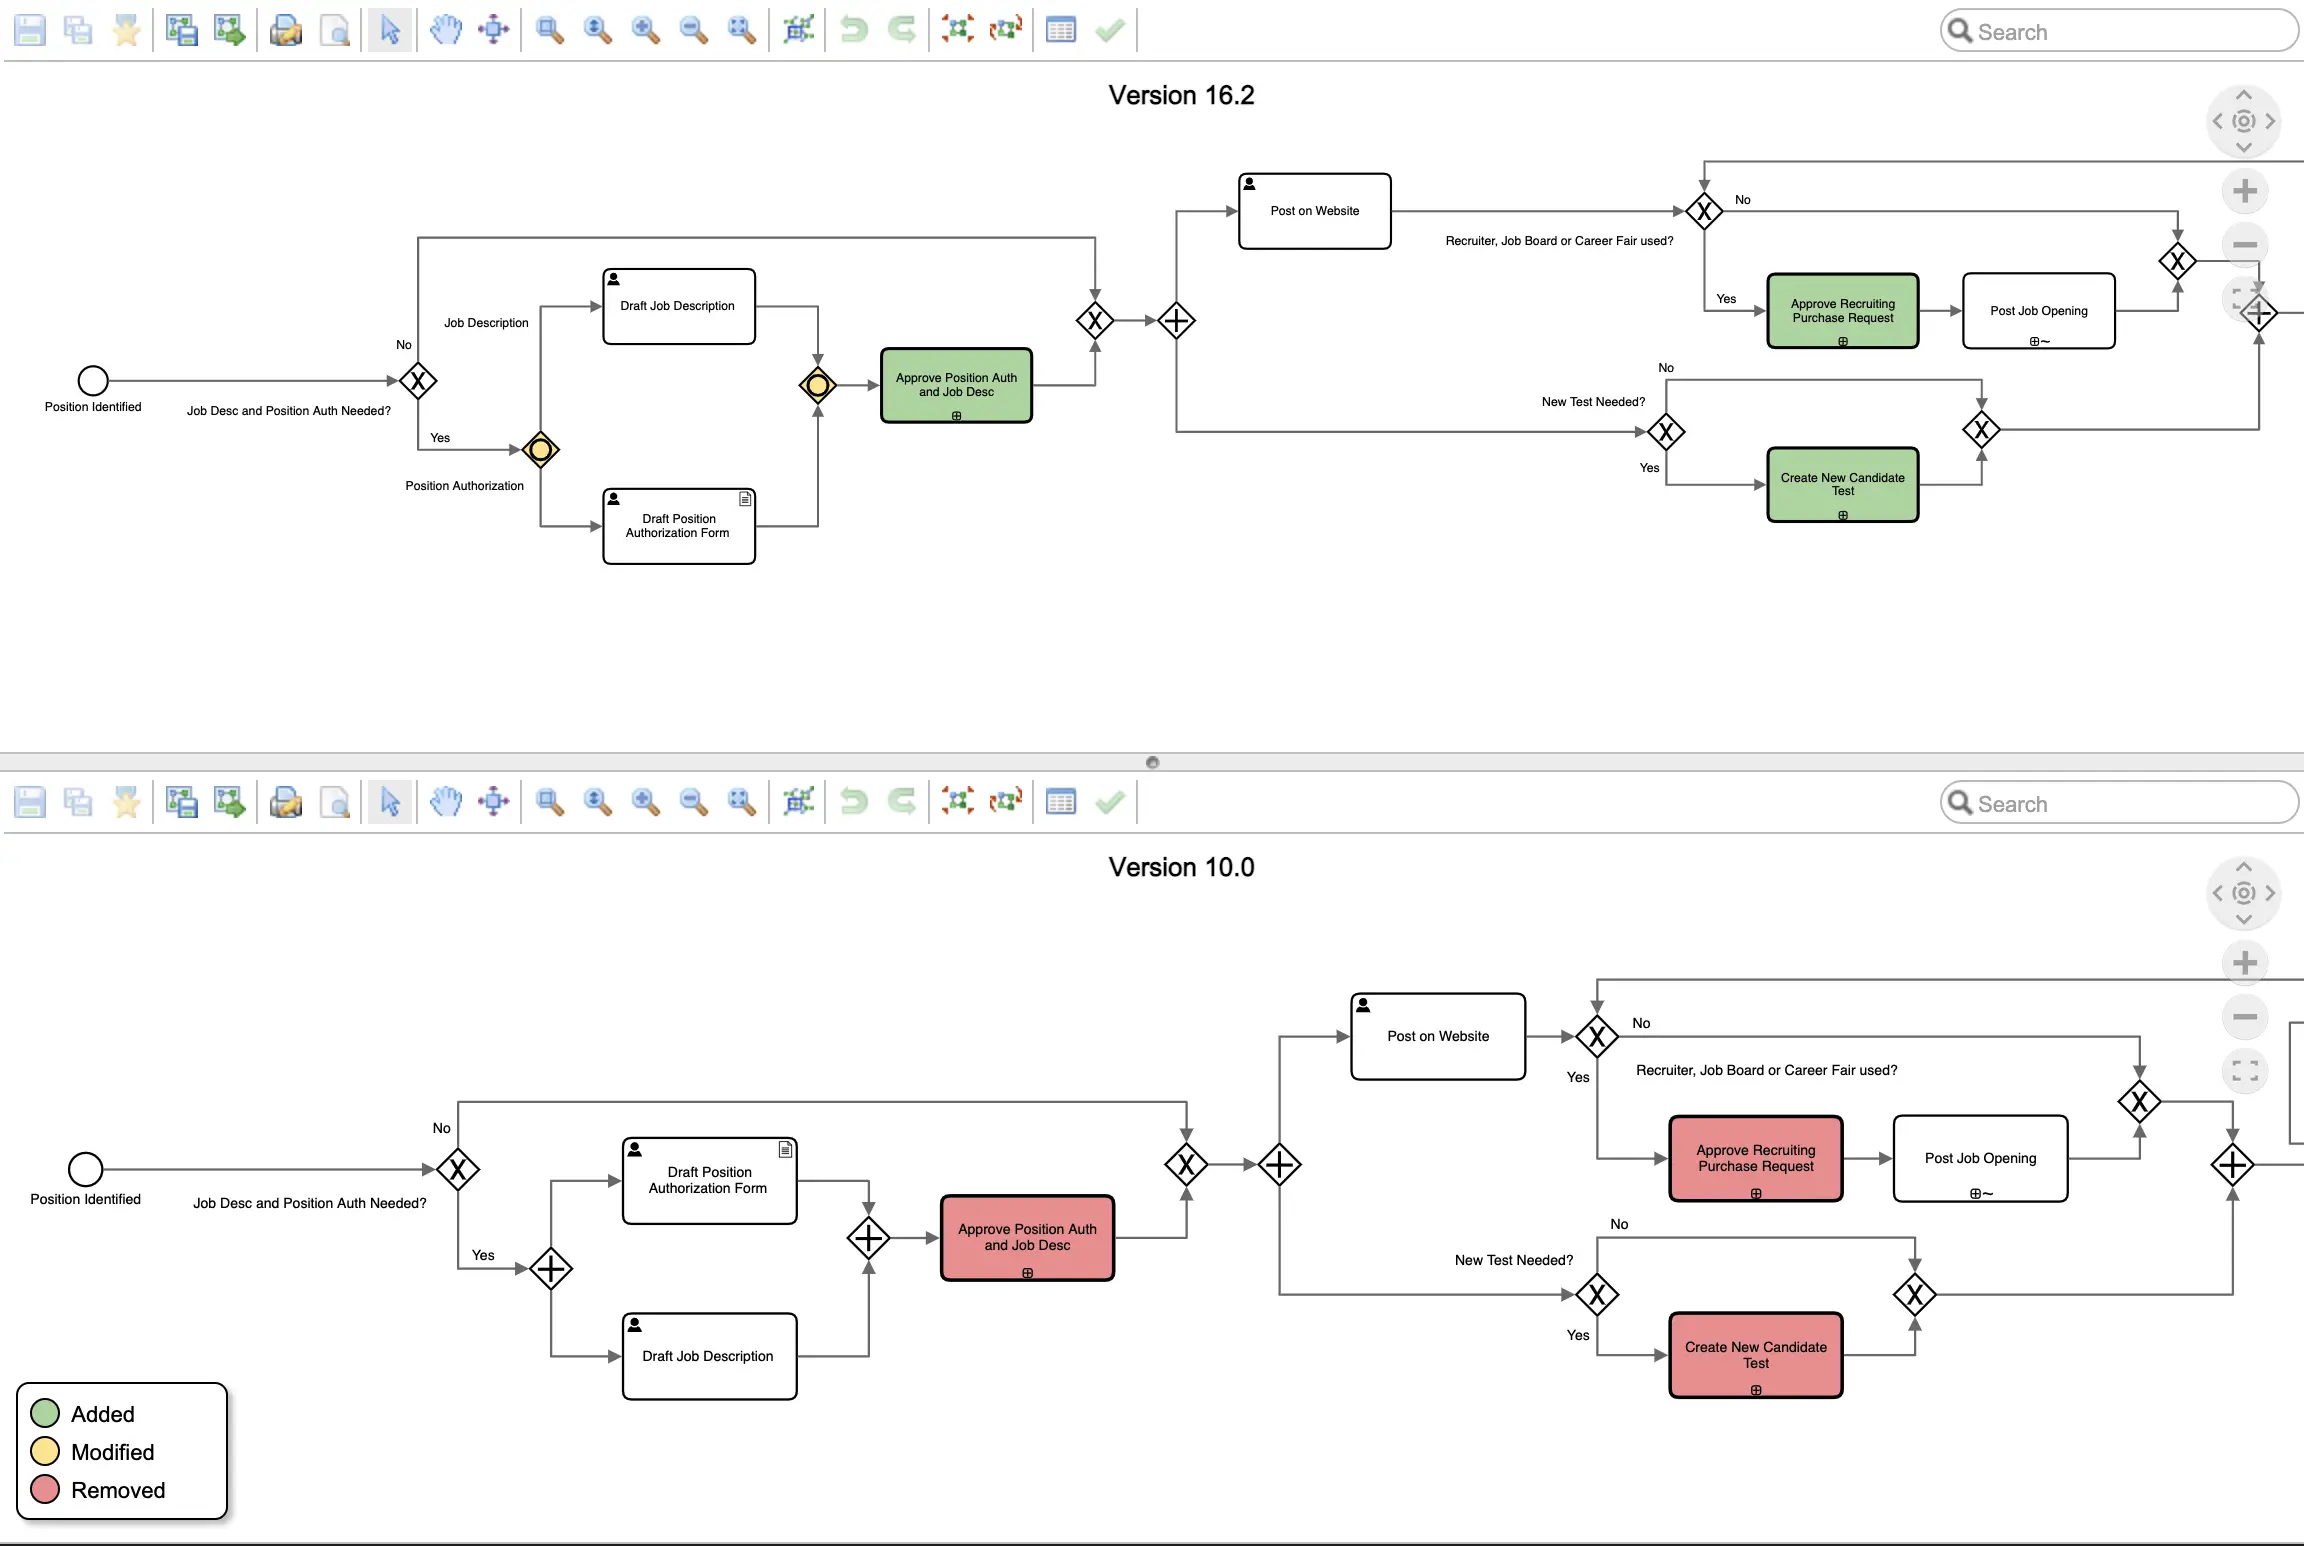 Visually compare two versions of a process in the Business Process Modeling module